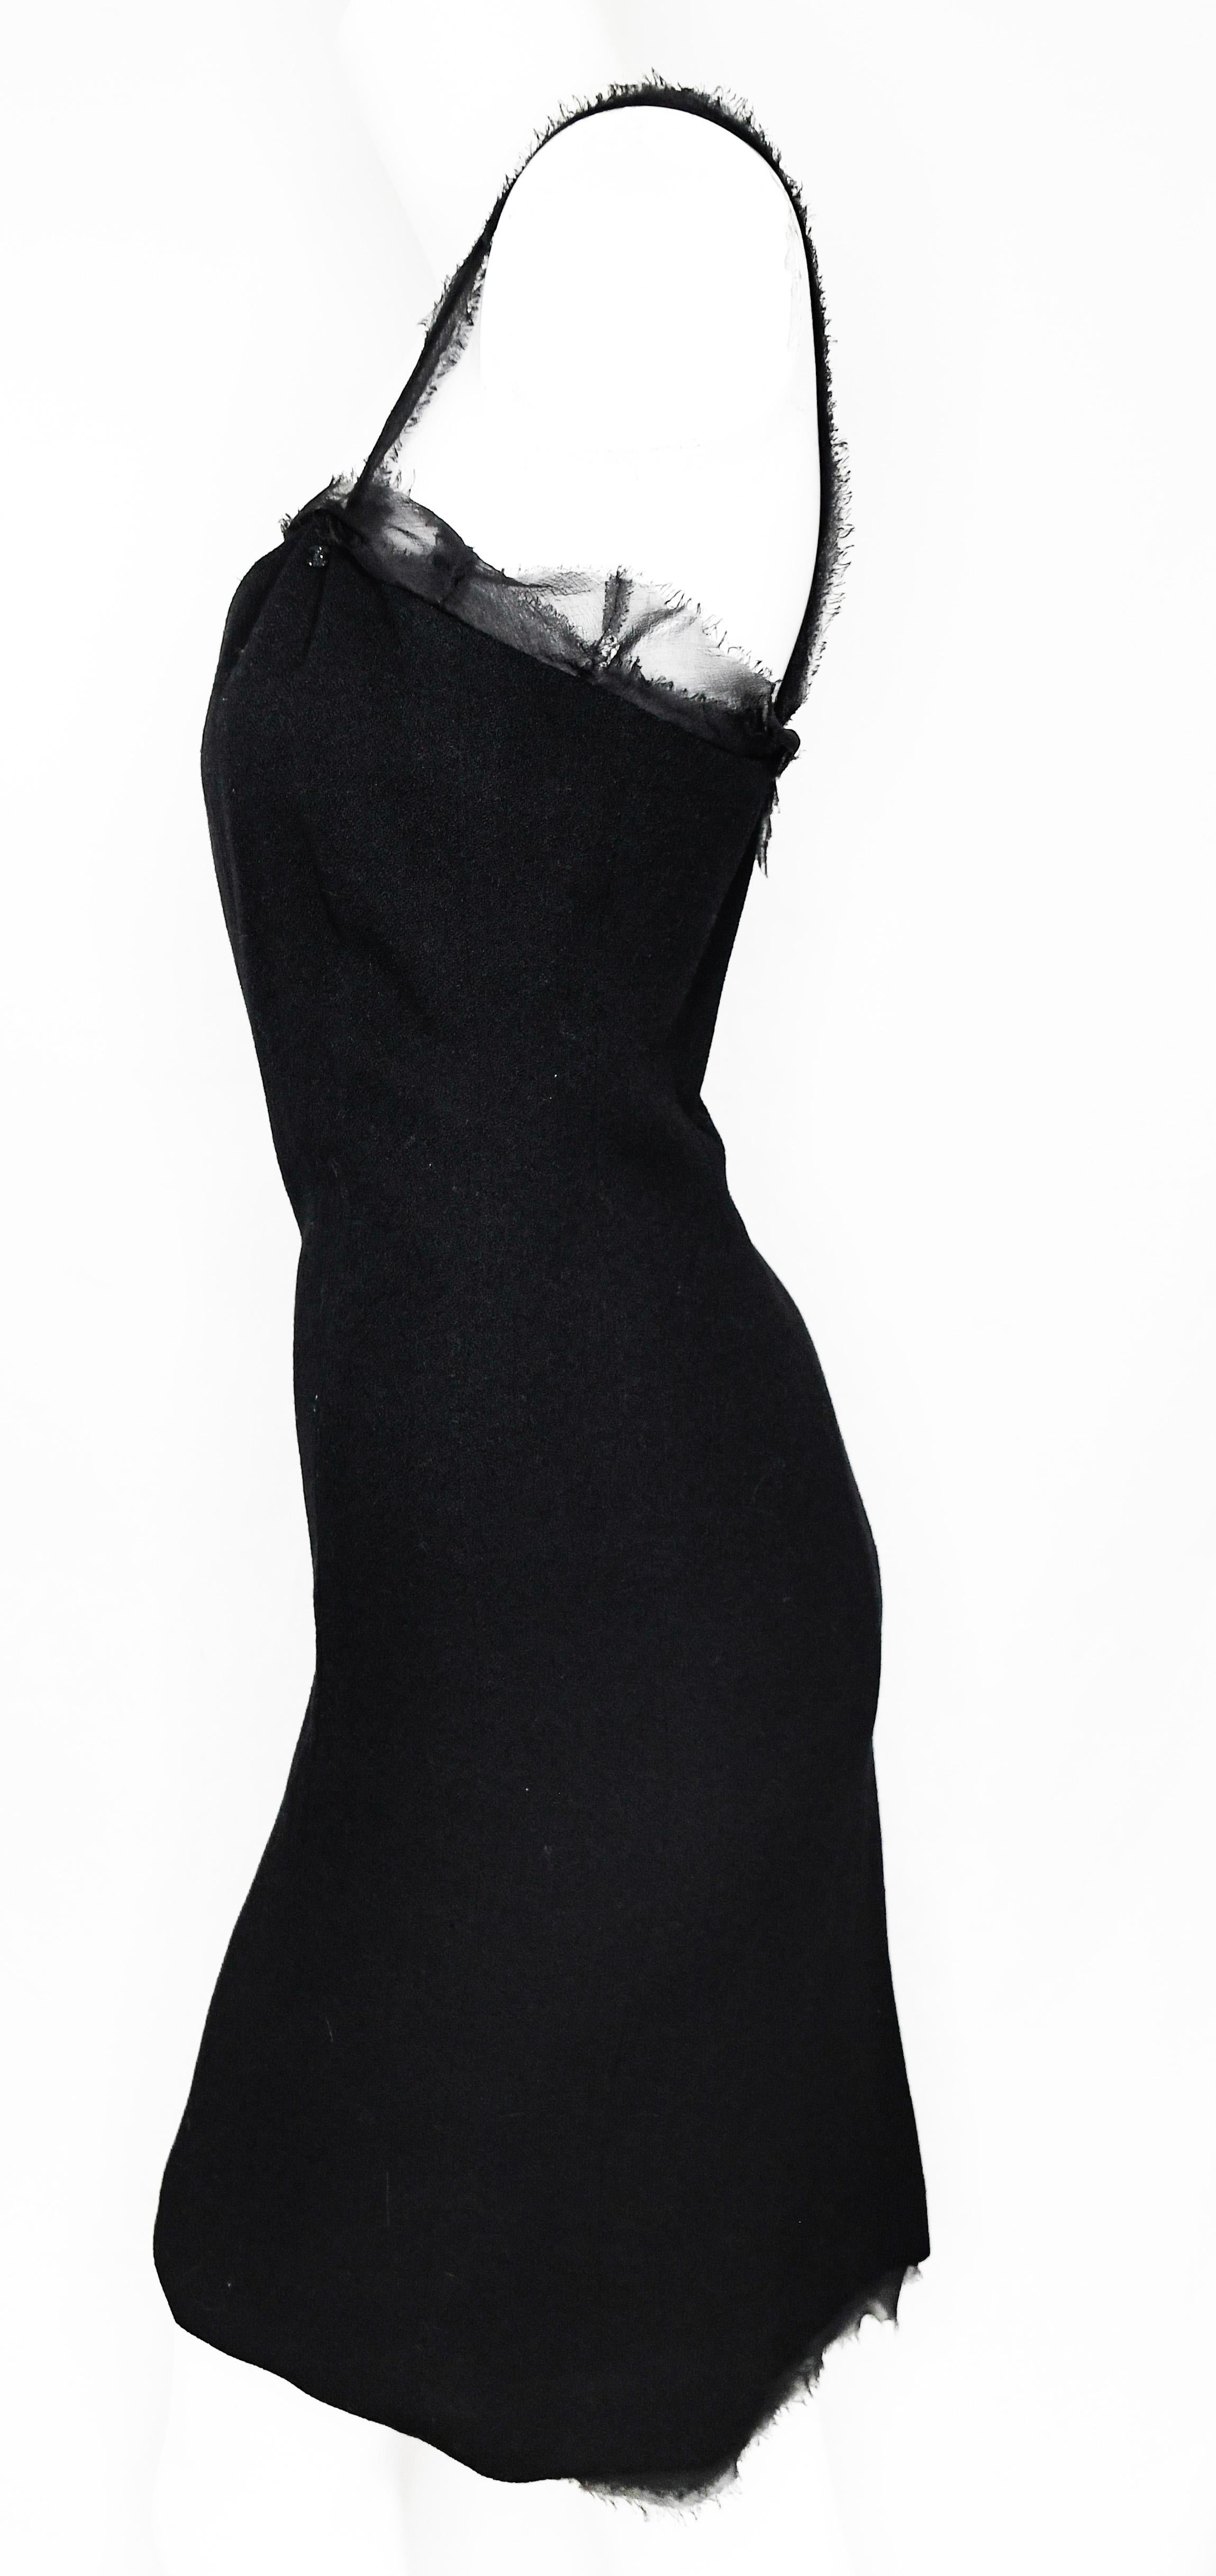 Chanel Black Wool Crepe Sleeveless Sheath Dress With Frayed Sheer Trim 38 EU In Excellent Condition For Sale In Palm Beach, FL